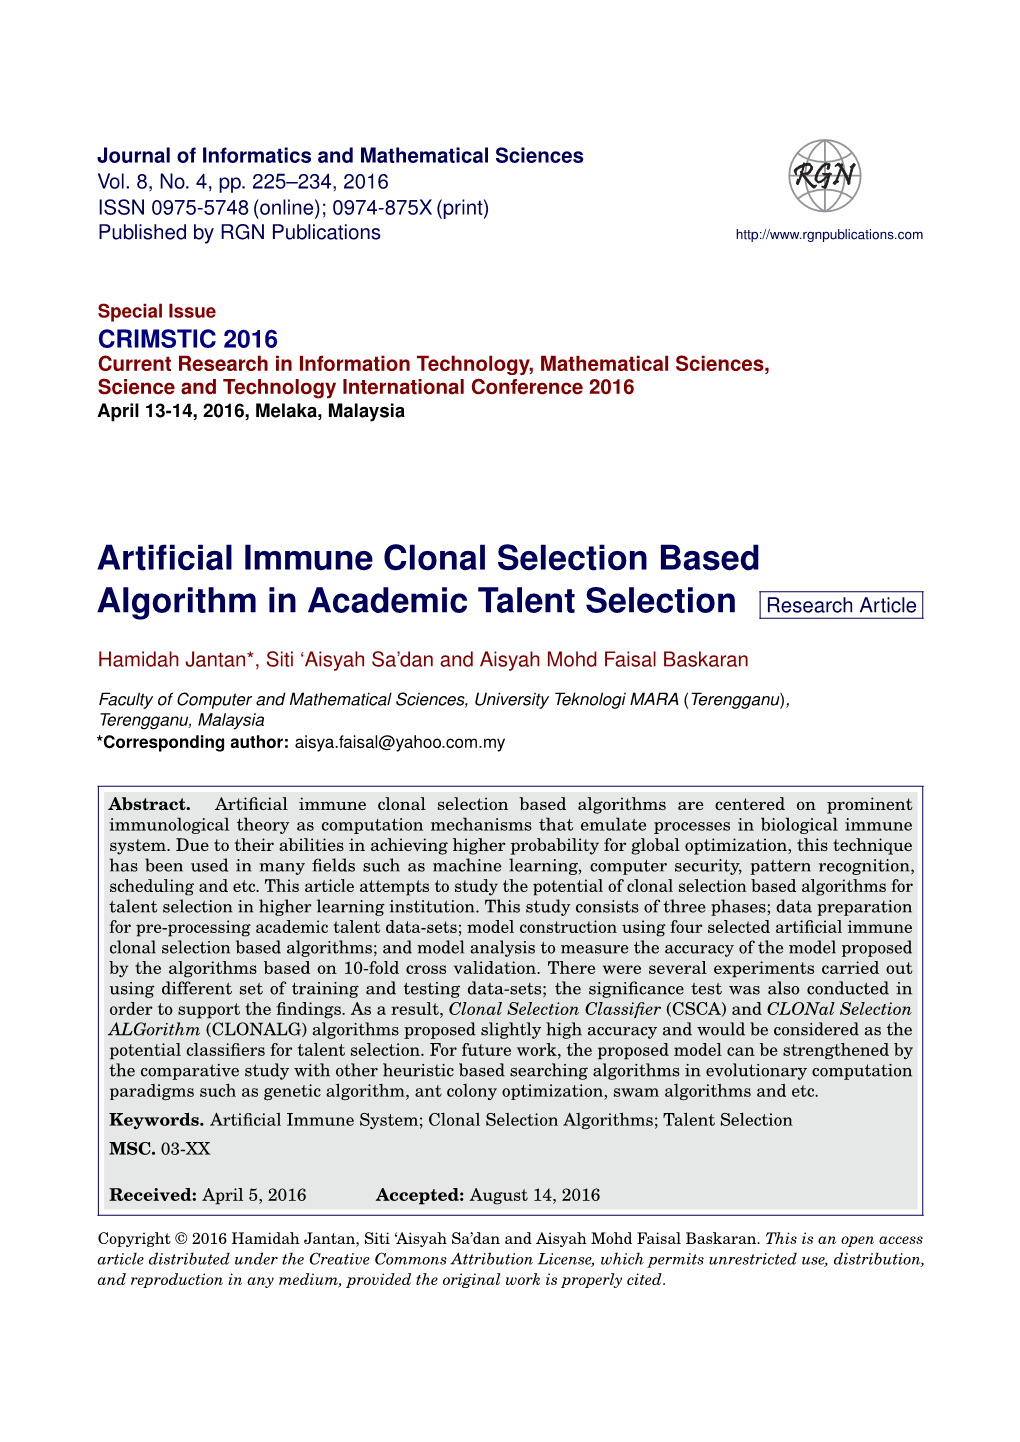 Artificial Immune Clonal Selection Based Algorithm in Academic